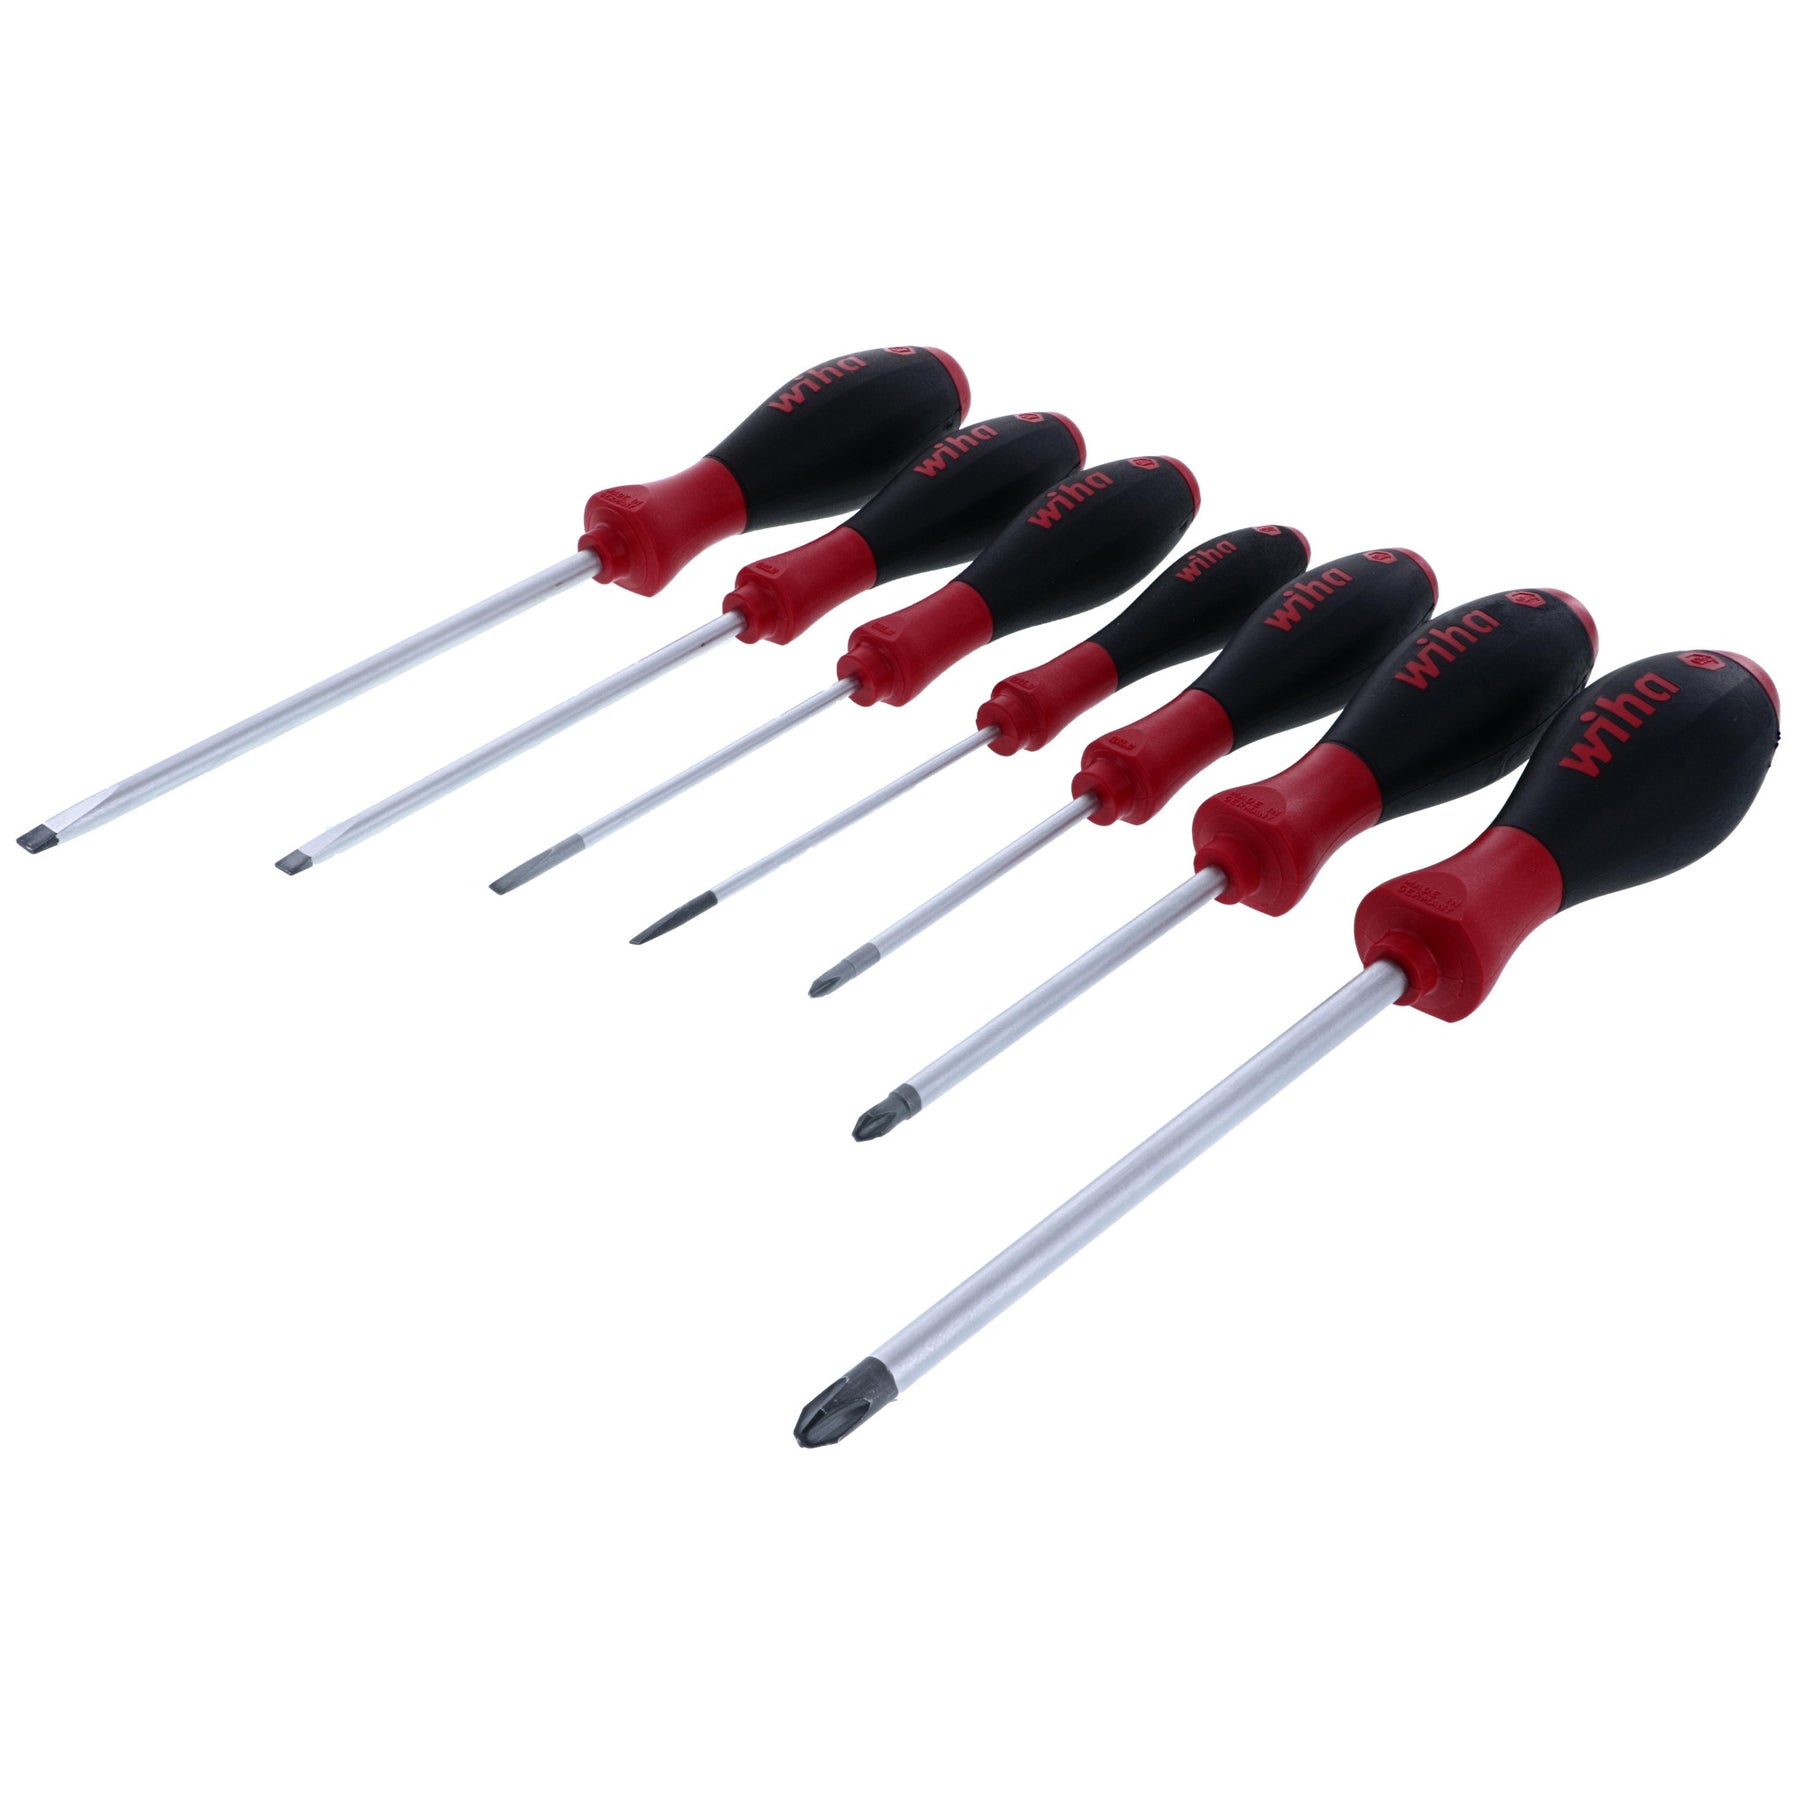 Wiha 30278 7 Piece SoftFinish Slotted and Phillips Screwdriver Set